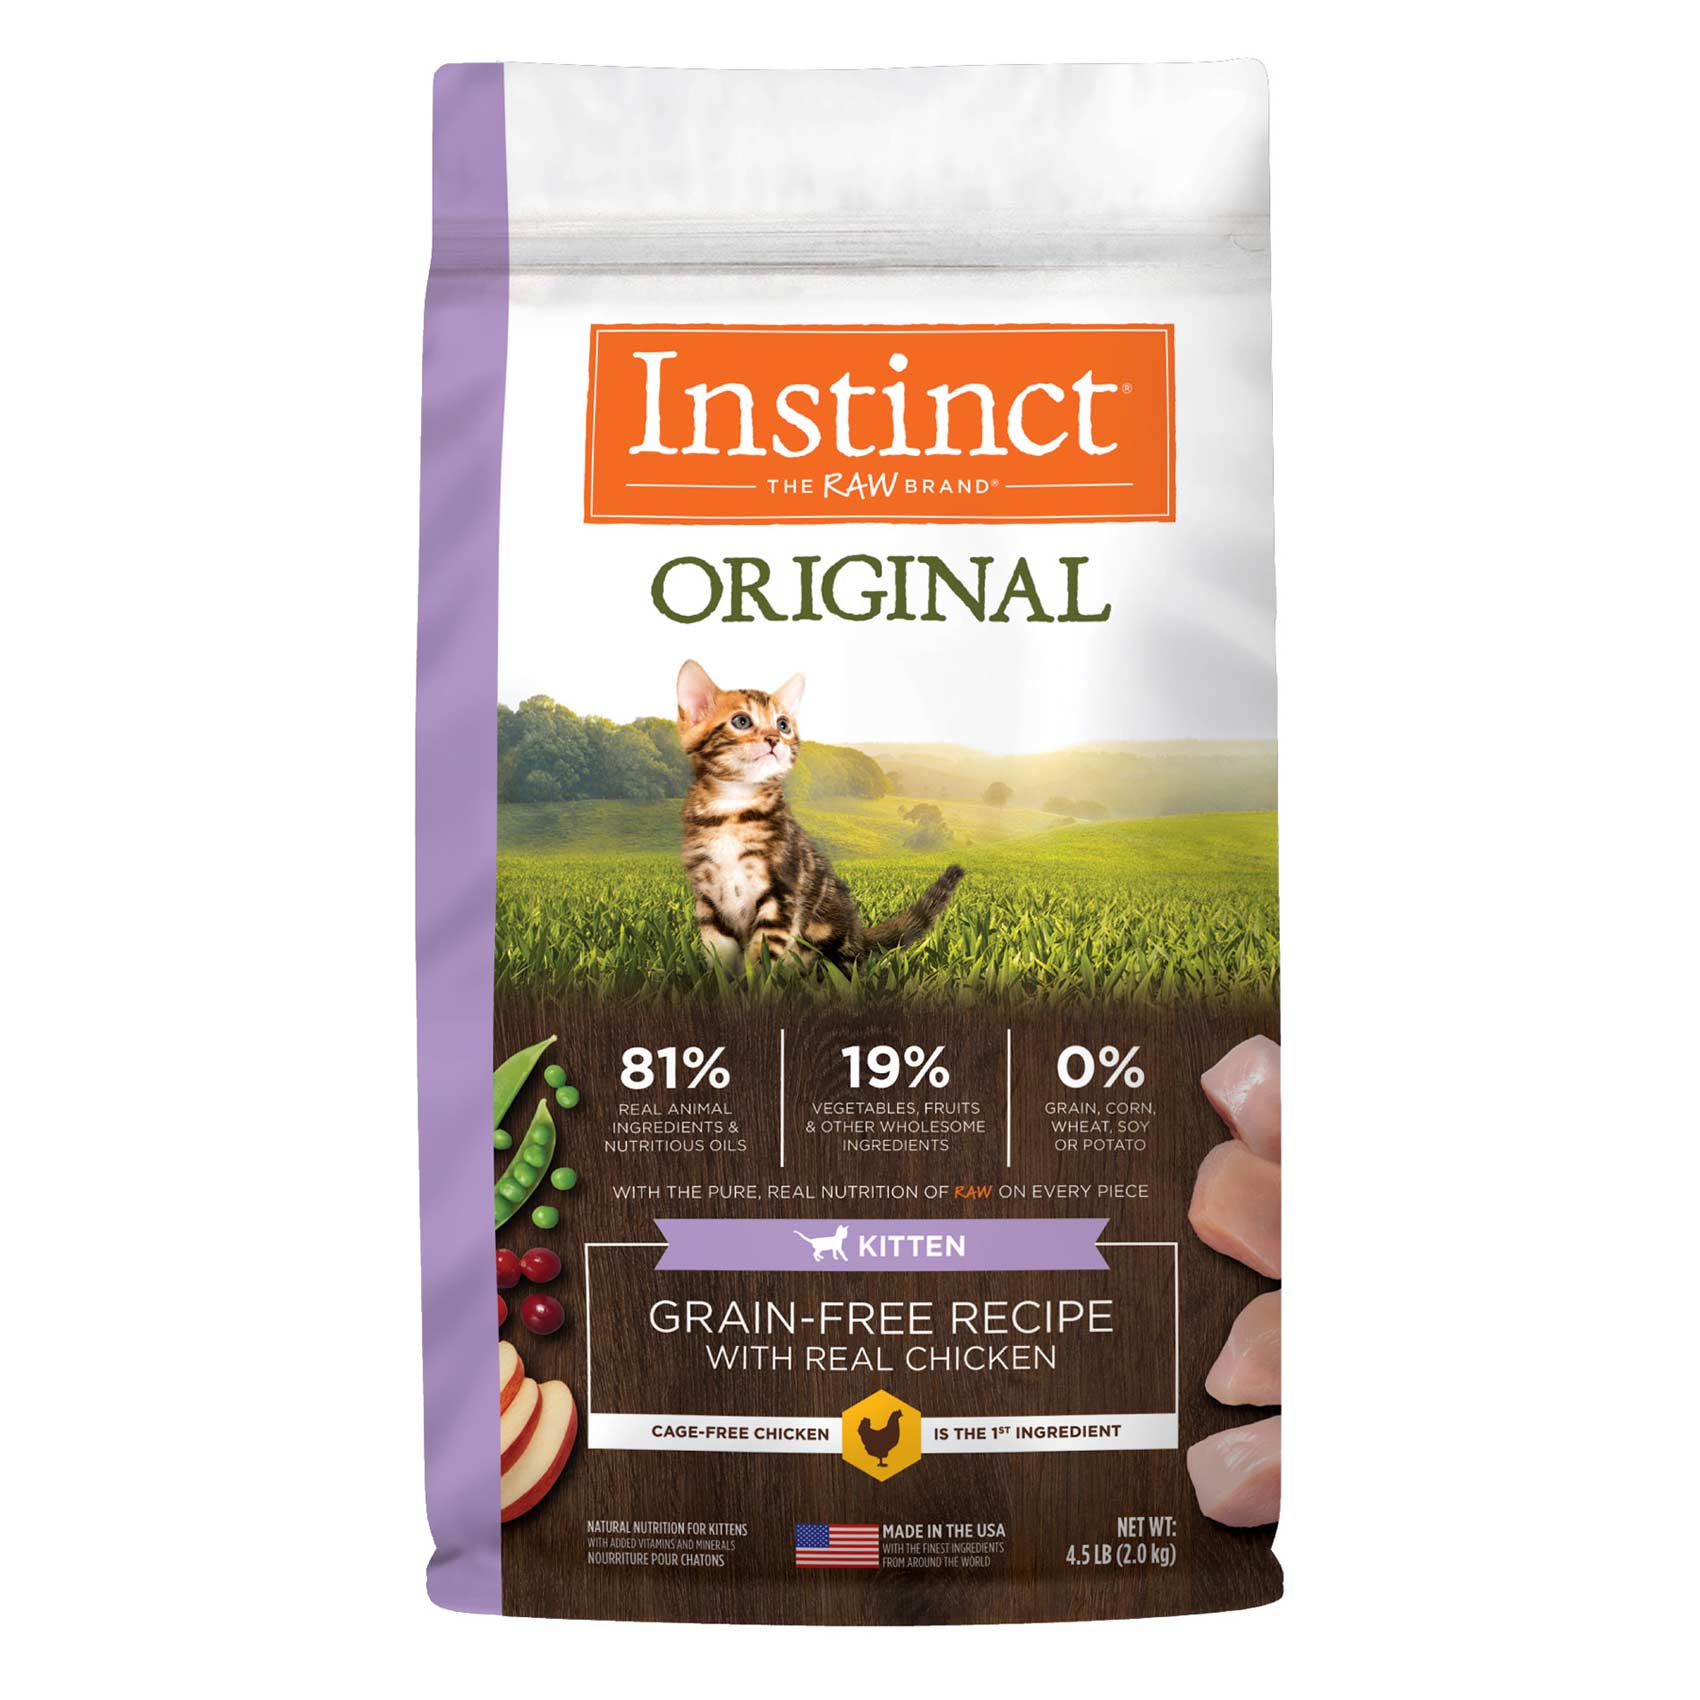 Instinct Original Kitten Grain-Free Recipe with Real Chicken Freeze-Dried Raw Coated Dry Cat Food, 4.5 Pound Bag